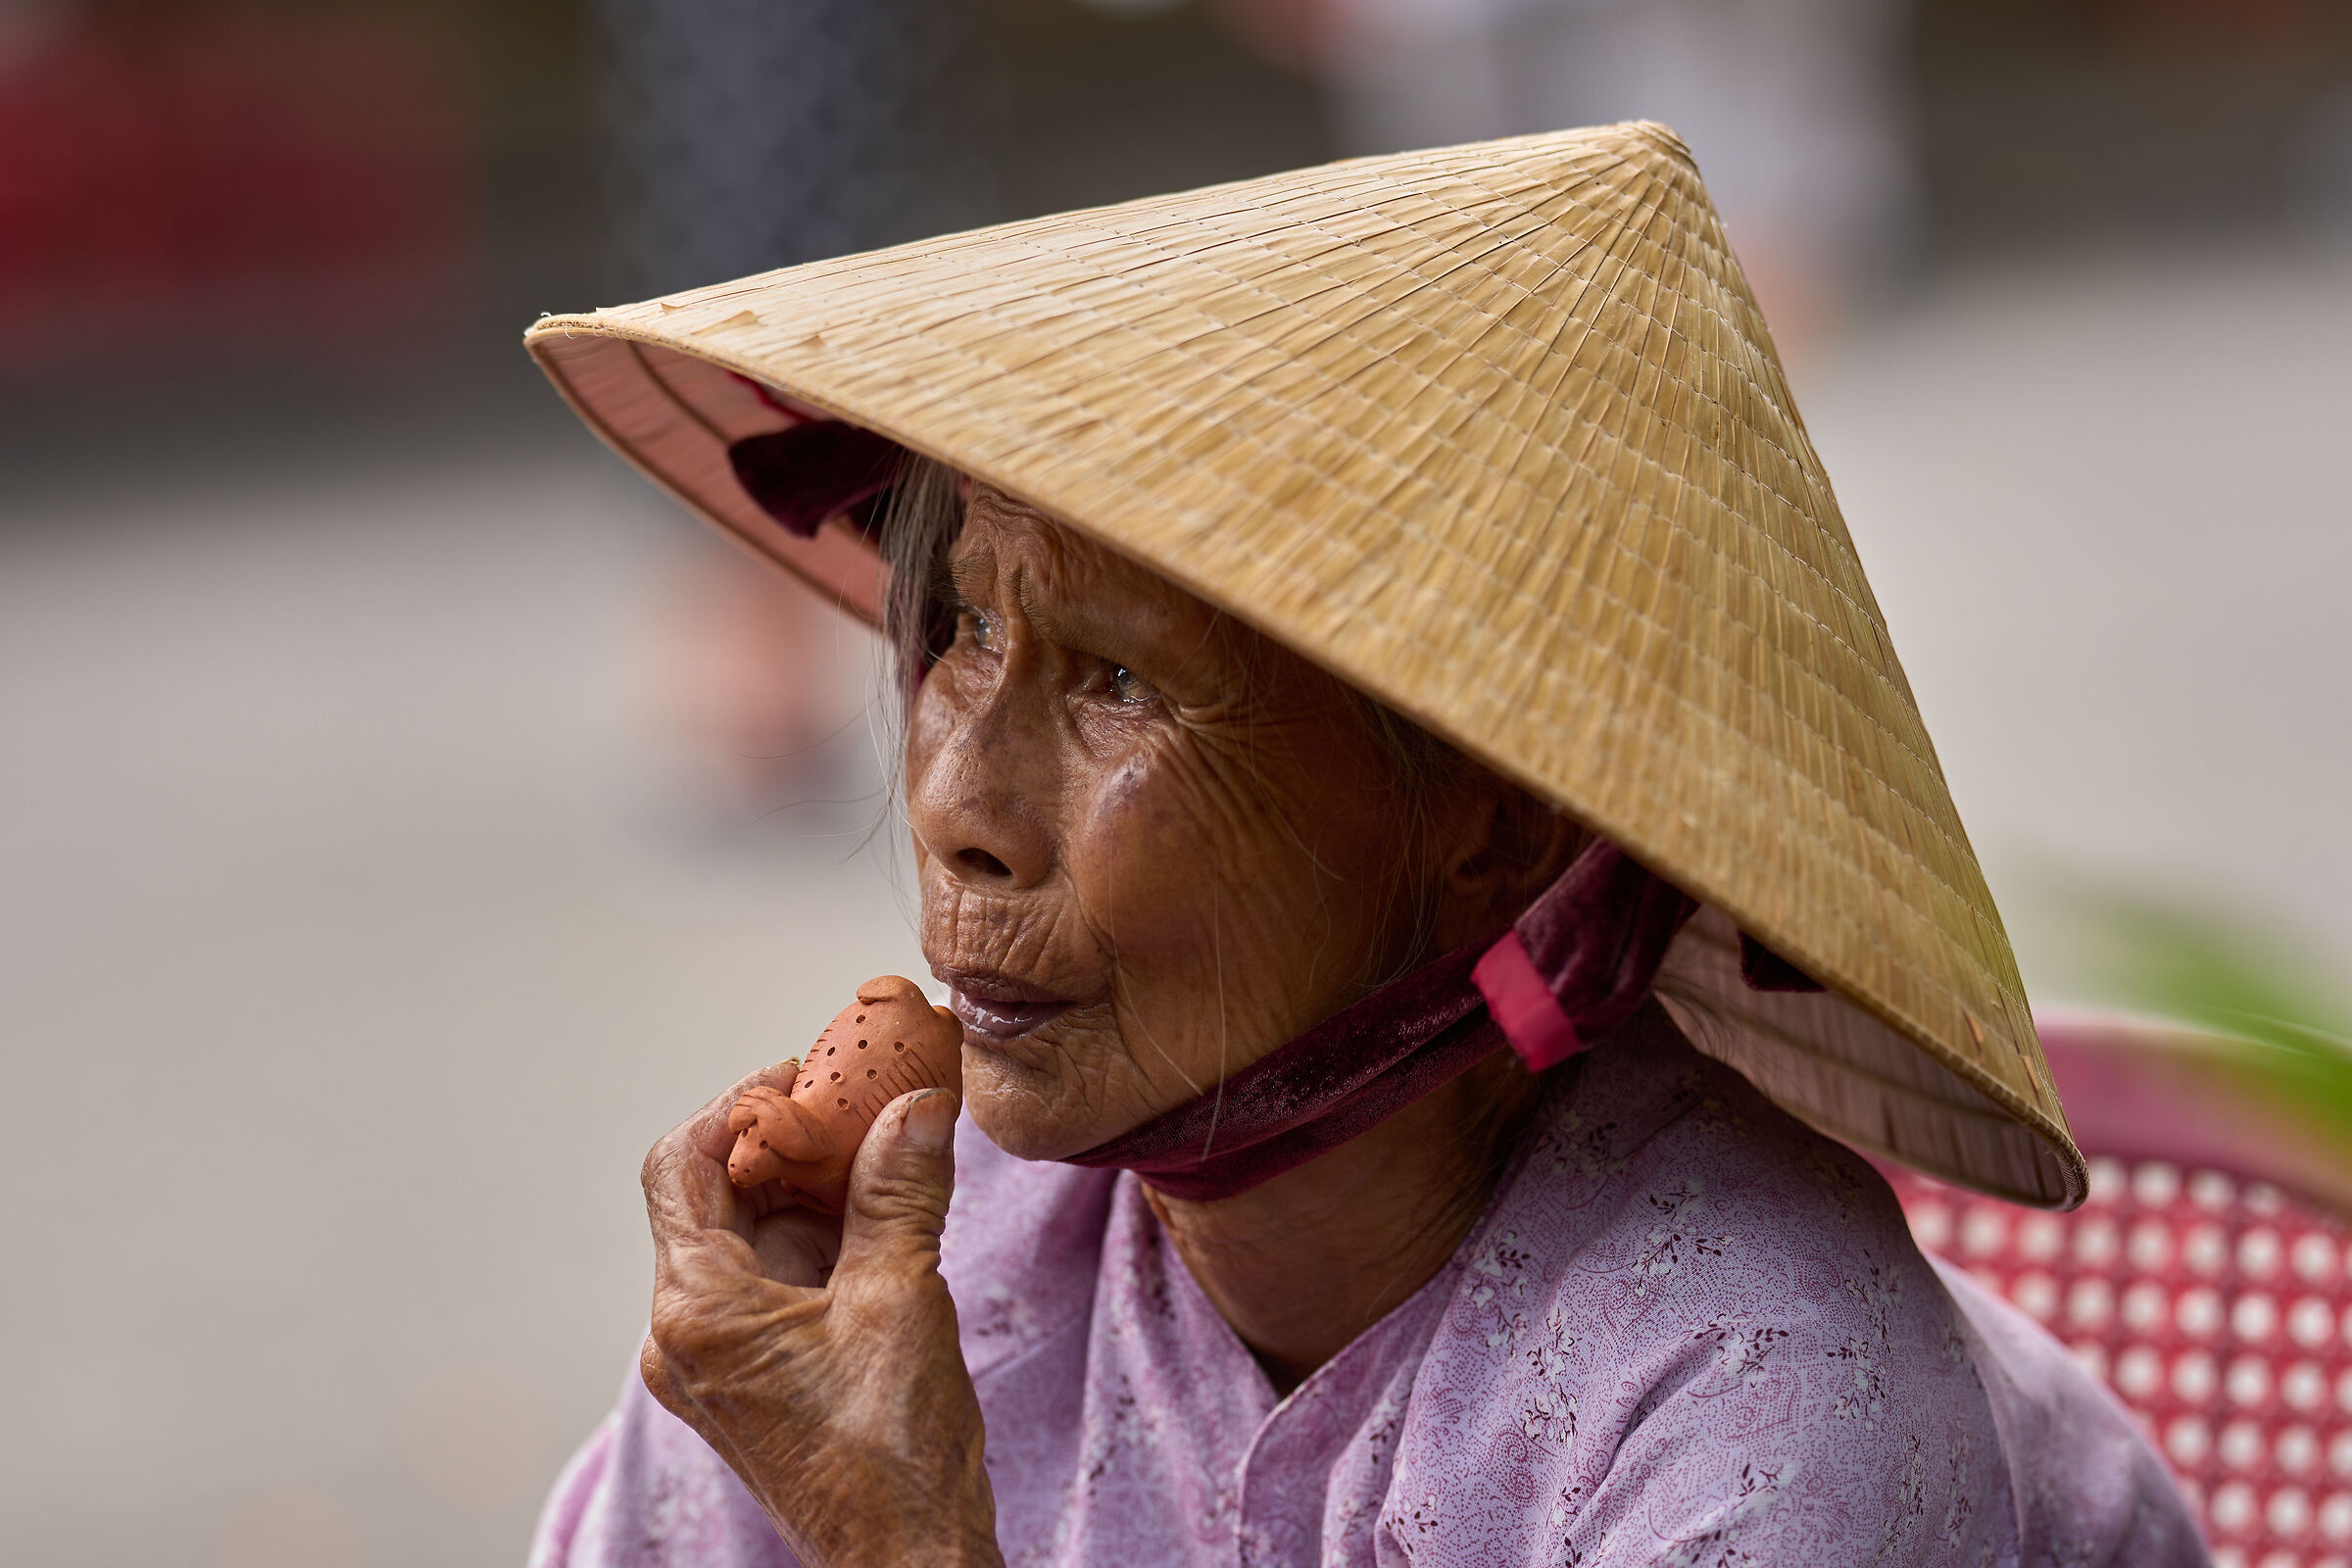 The woman who sold the whistles (Hoi An - Vietnam)...